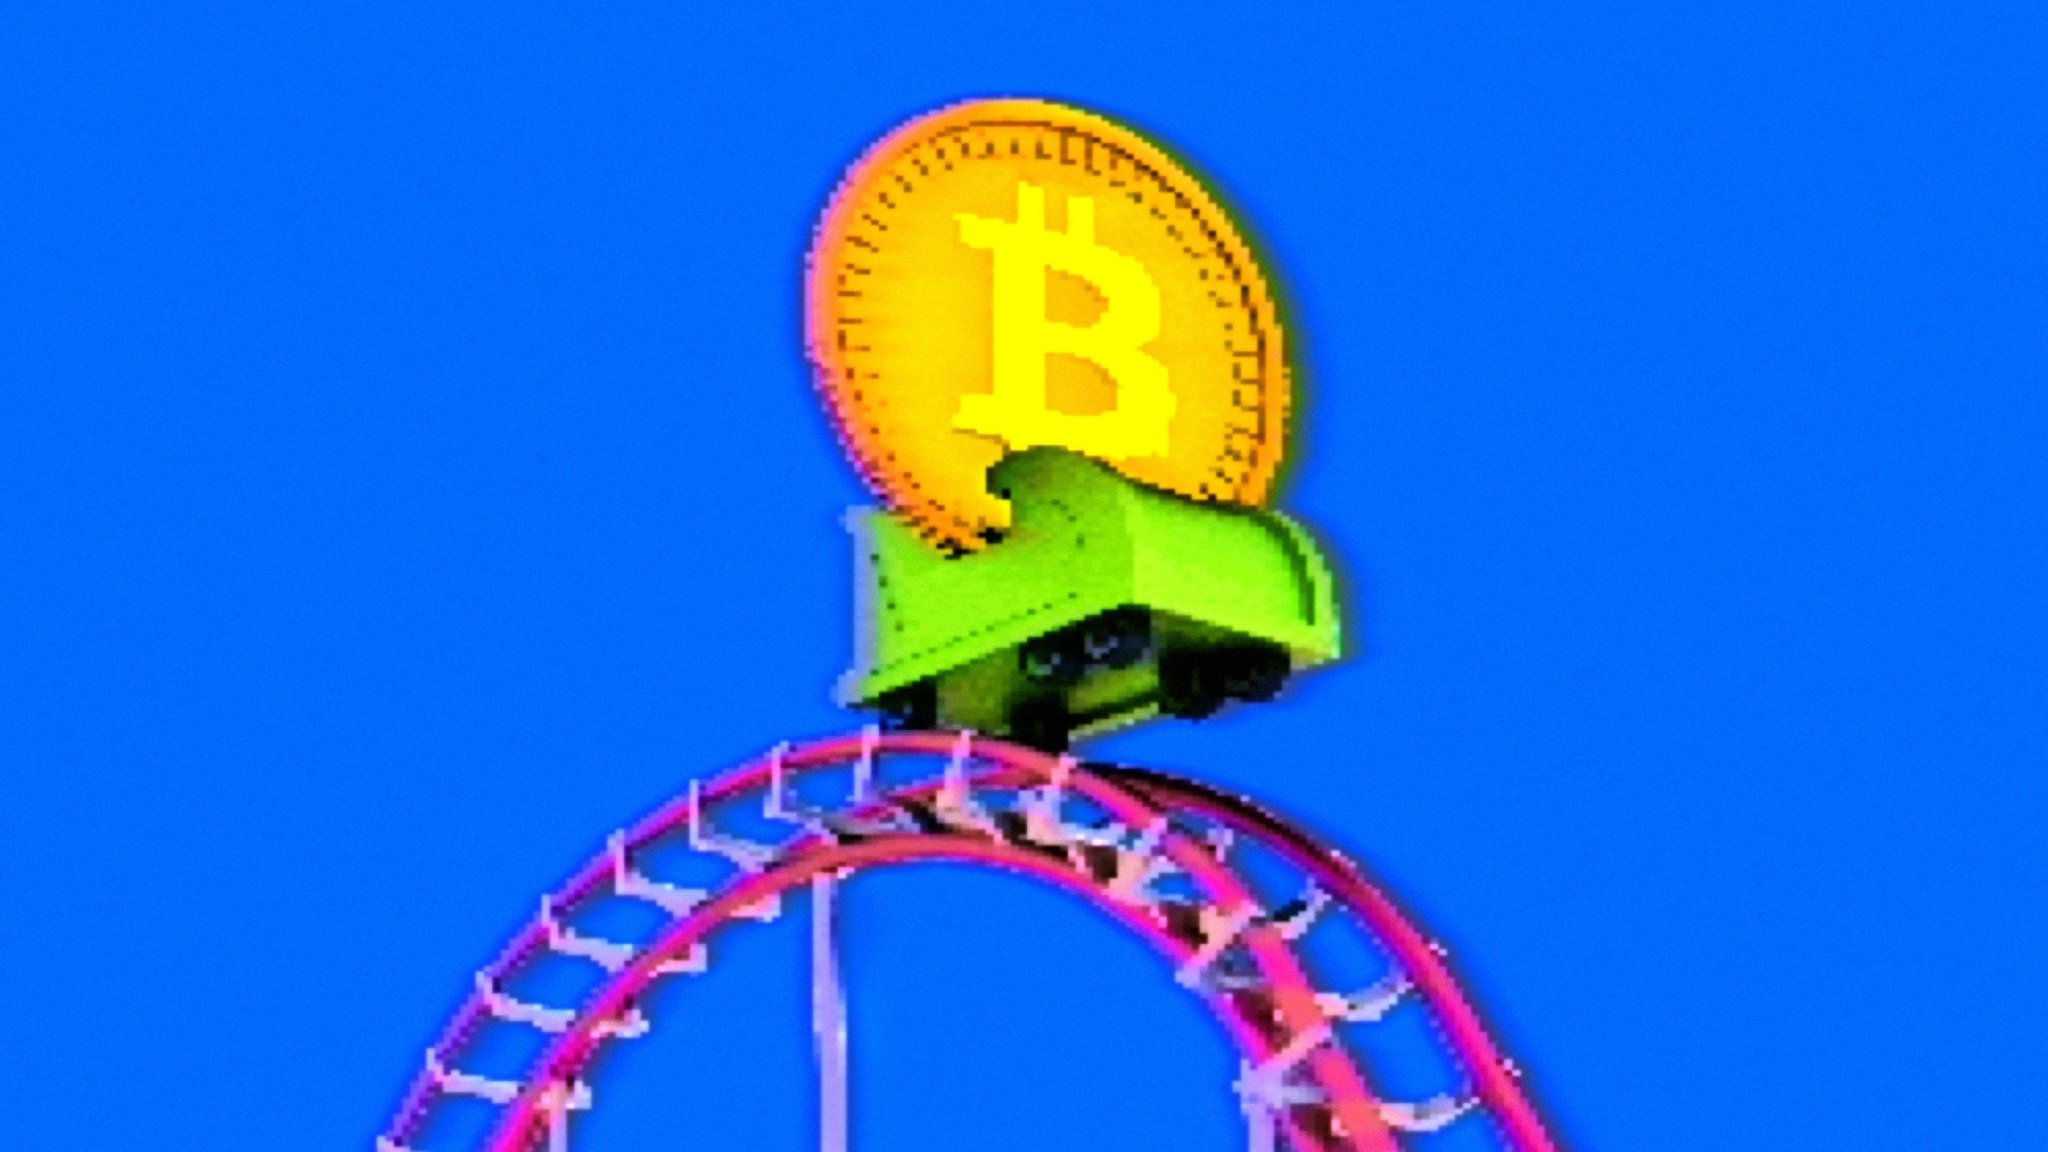 Use our bitcoin investment simulator to take a ride on the crypto market roller coaster